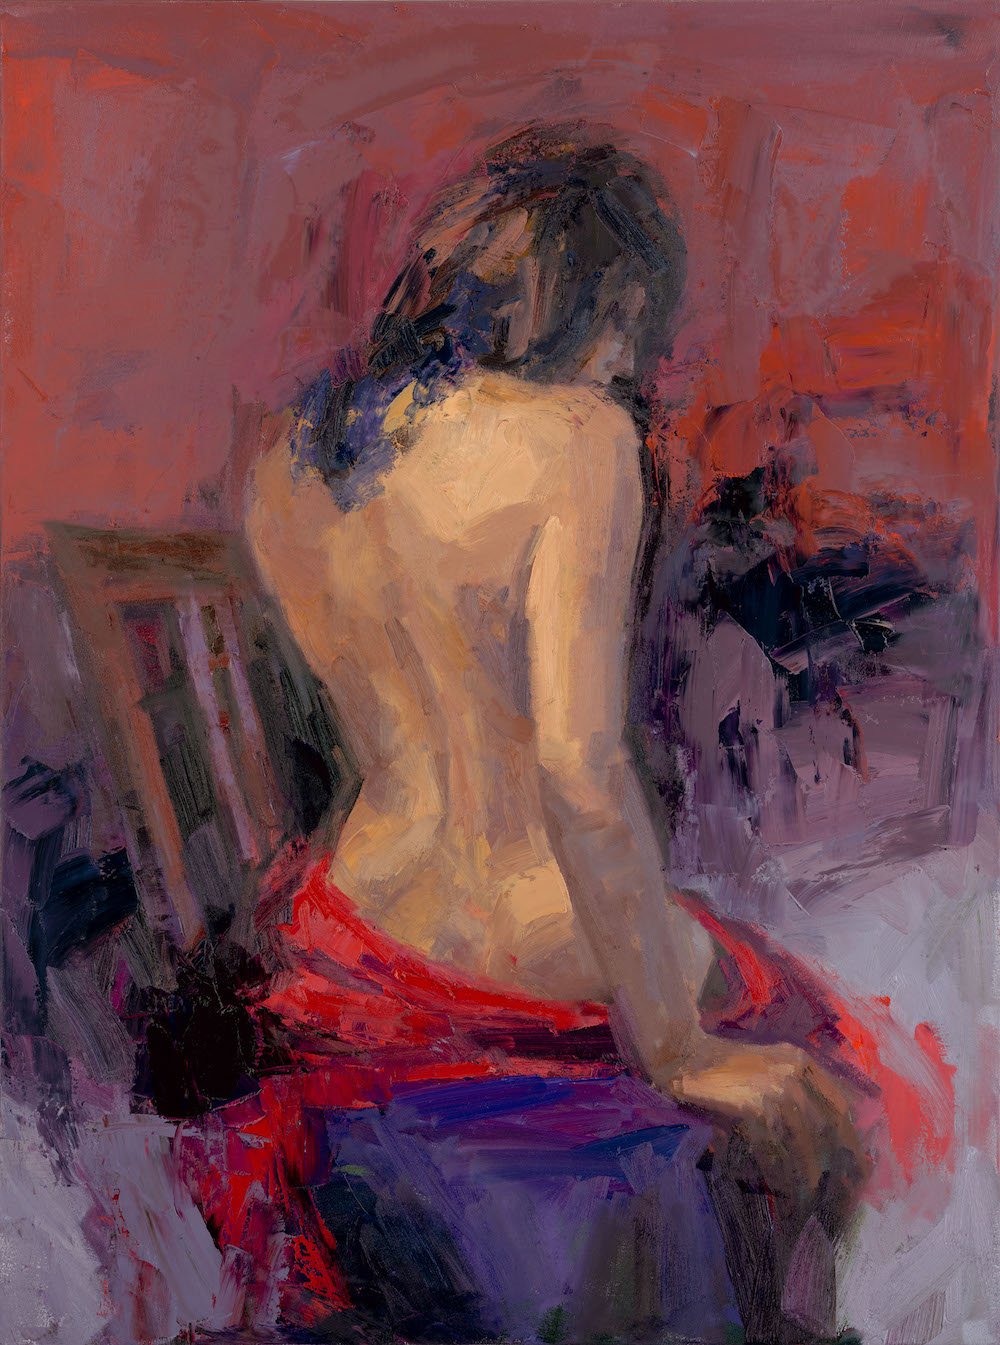 ibestudio Art 30x40 / Figurative / Limited Edition Giclee on Canvas Print Seated Figure - Painting - Giclee on Canvas